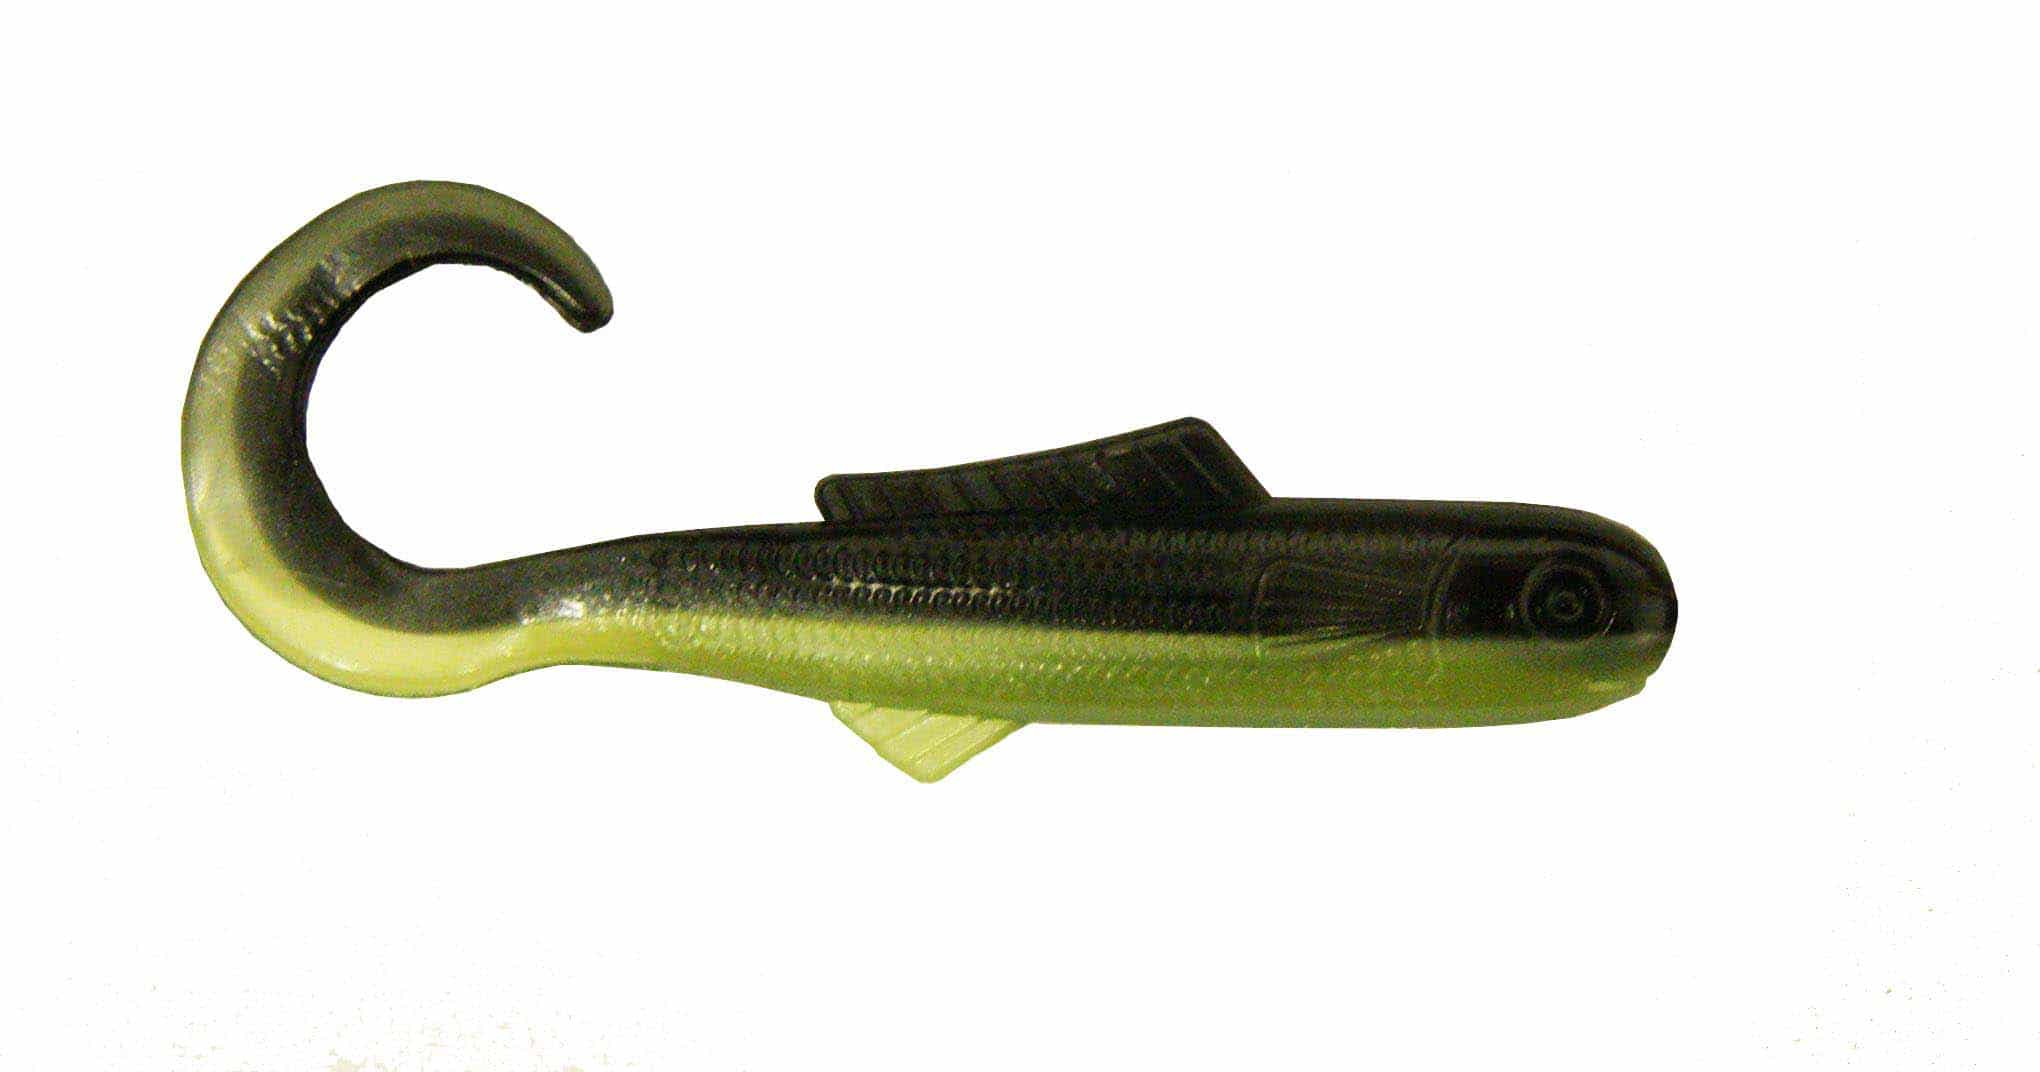 100-Pack Big Bite Baits 2.5-Inch Minnow-Curl Tail Lure